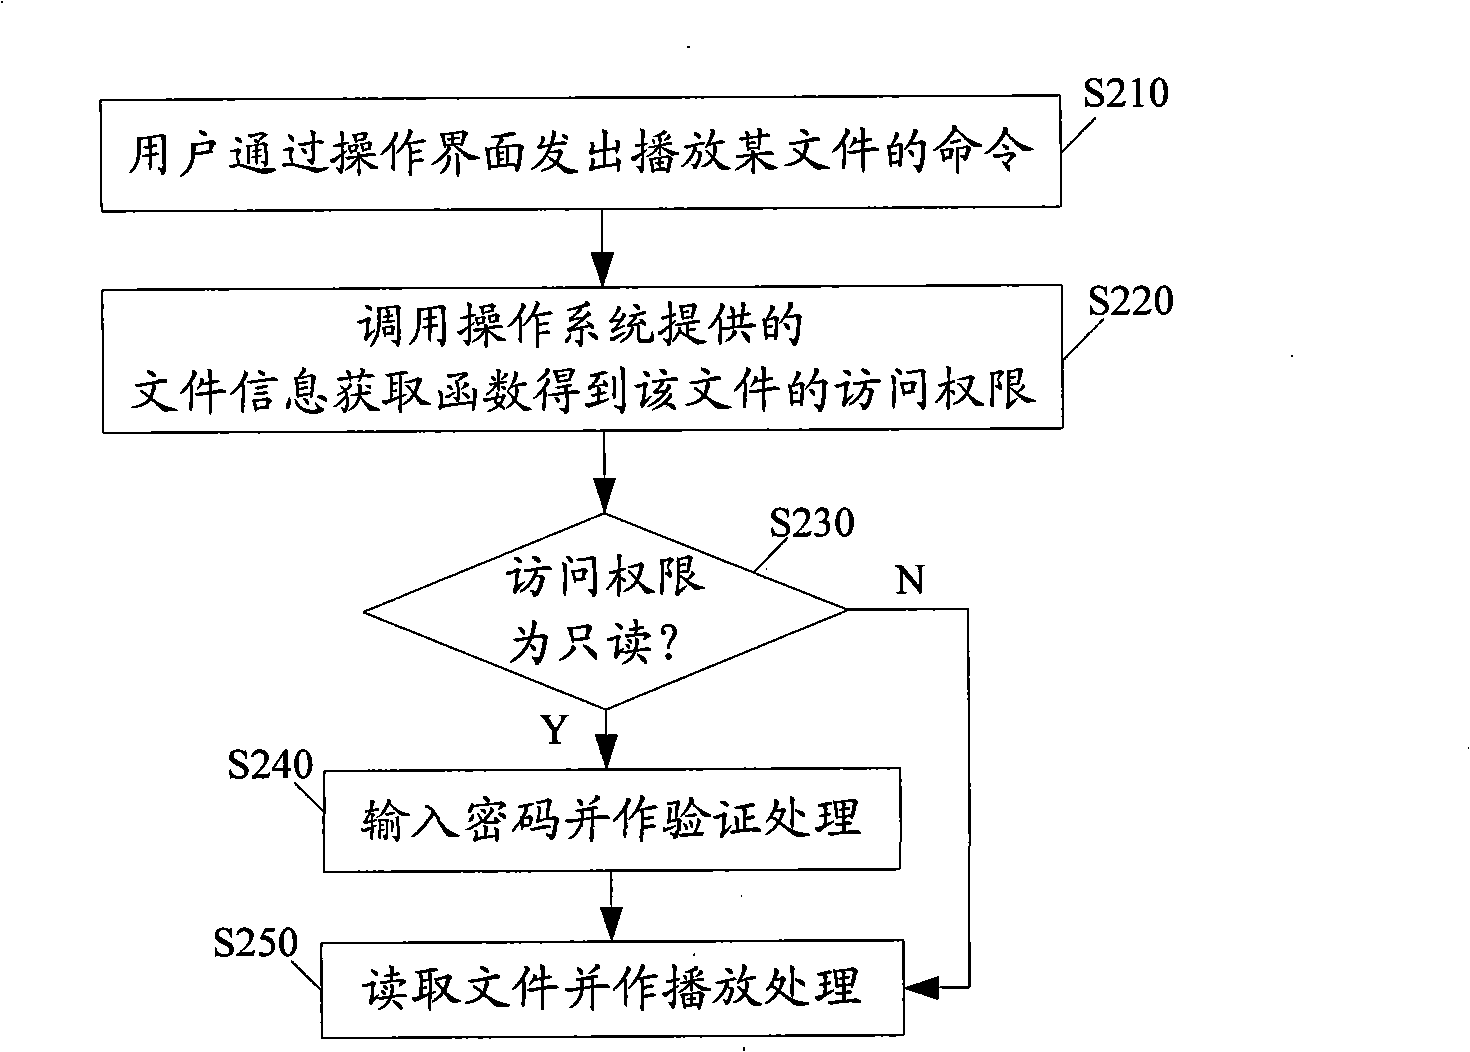 Digital television receiver, method and apparatus for lock control of recording files